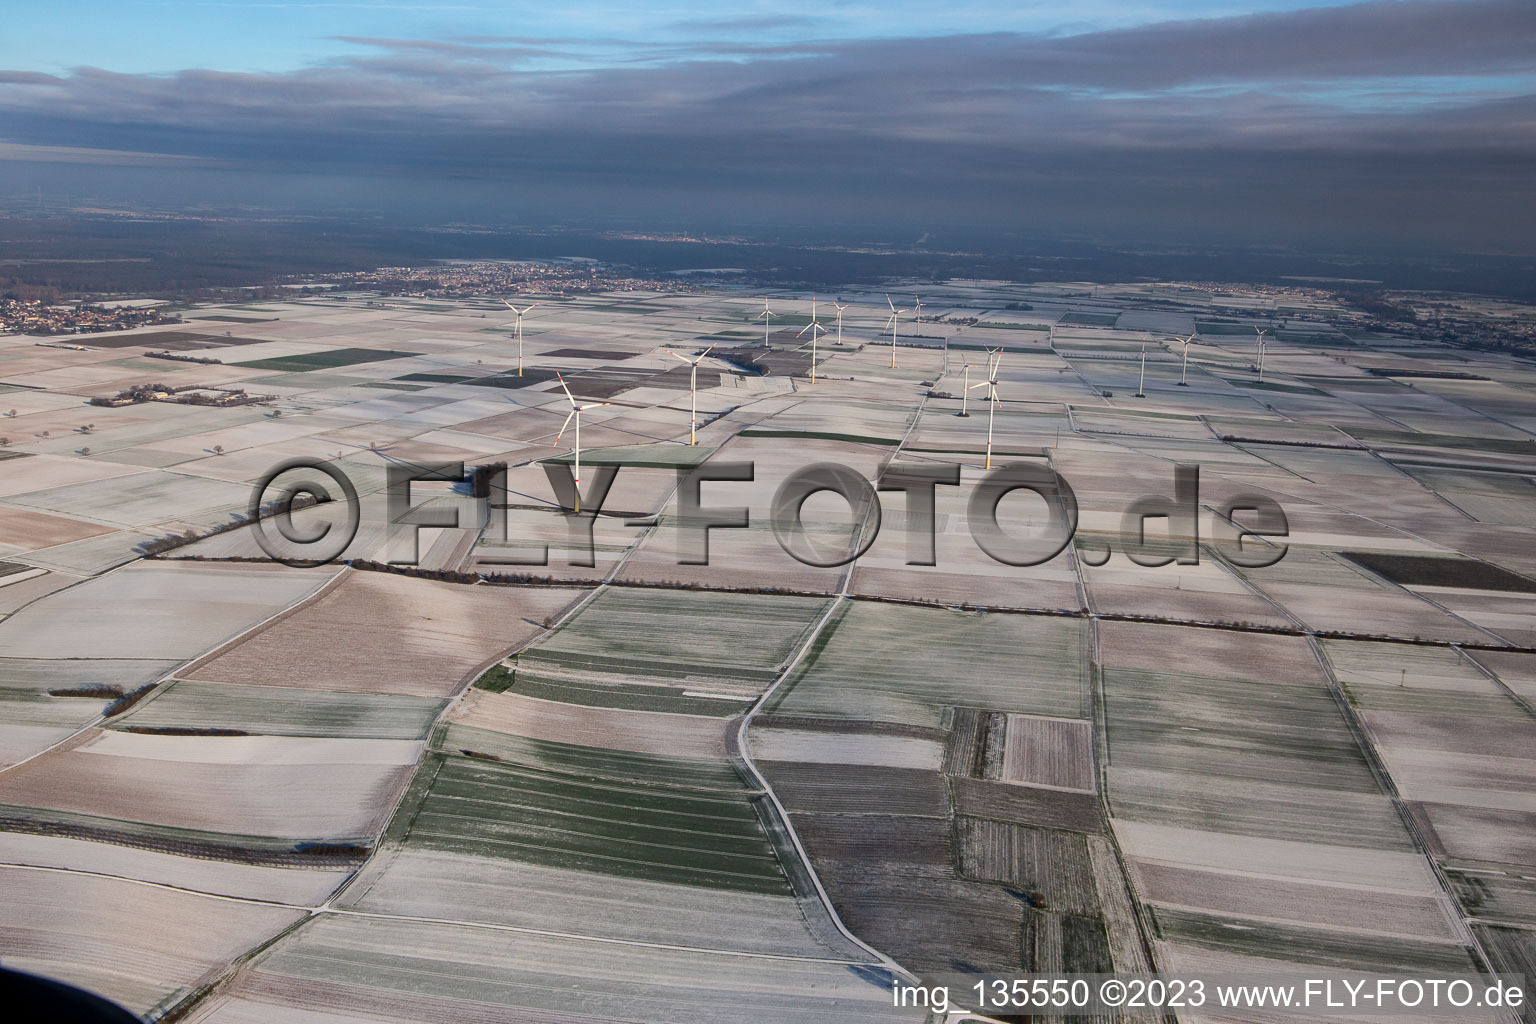 Aerial view of Wind farm in winter with snow in Offenbach an der Queich in the state Rhineland-Palatinate, Germany